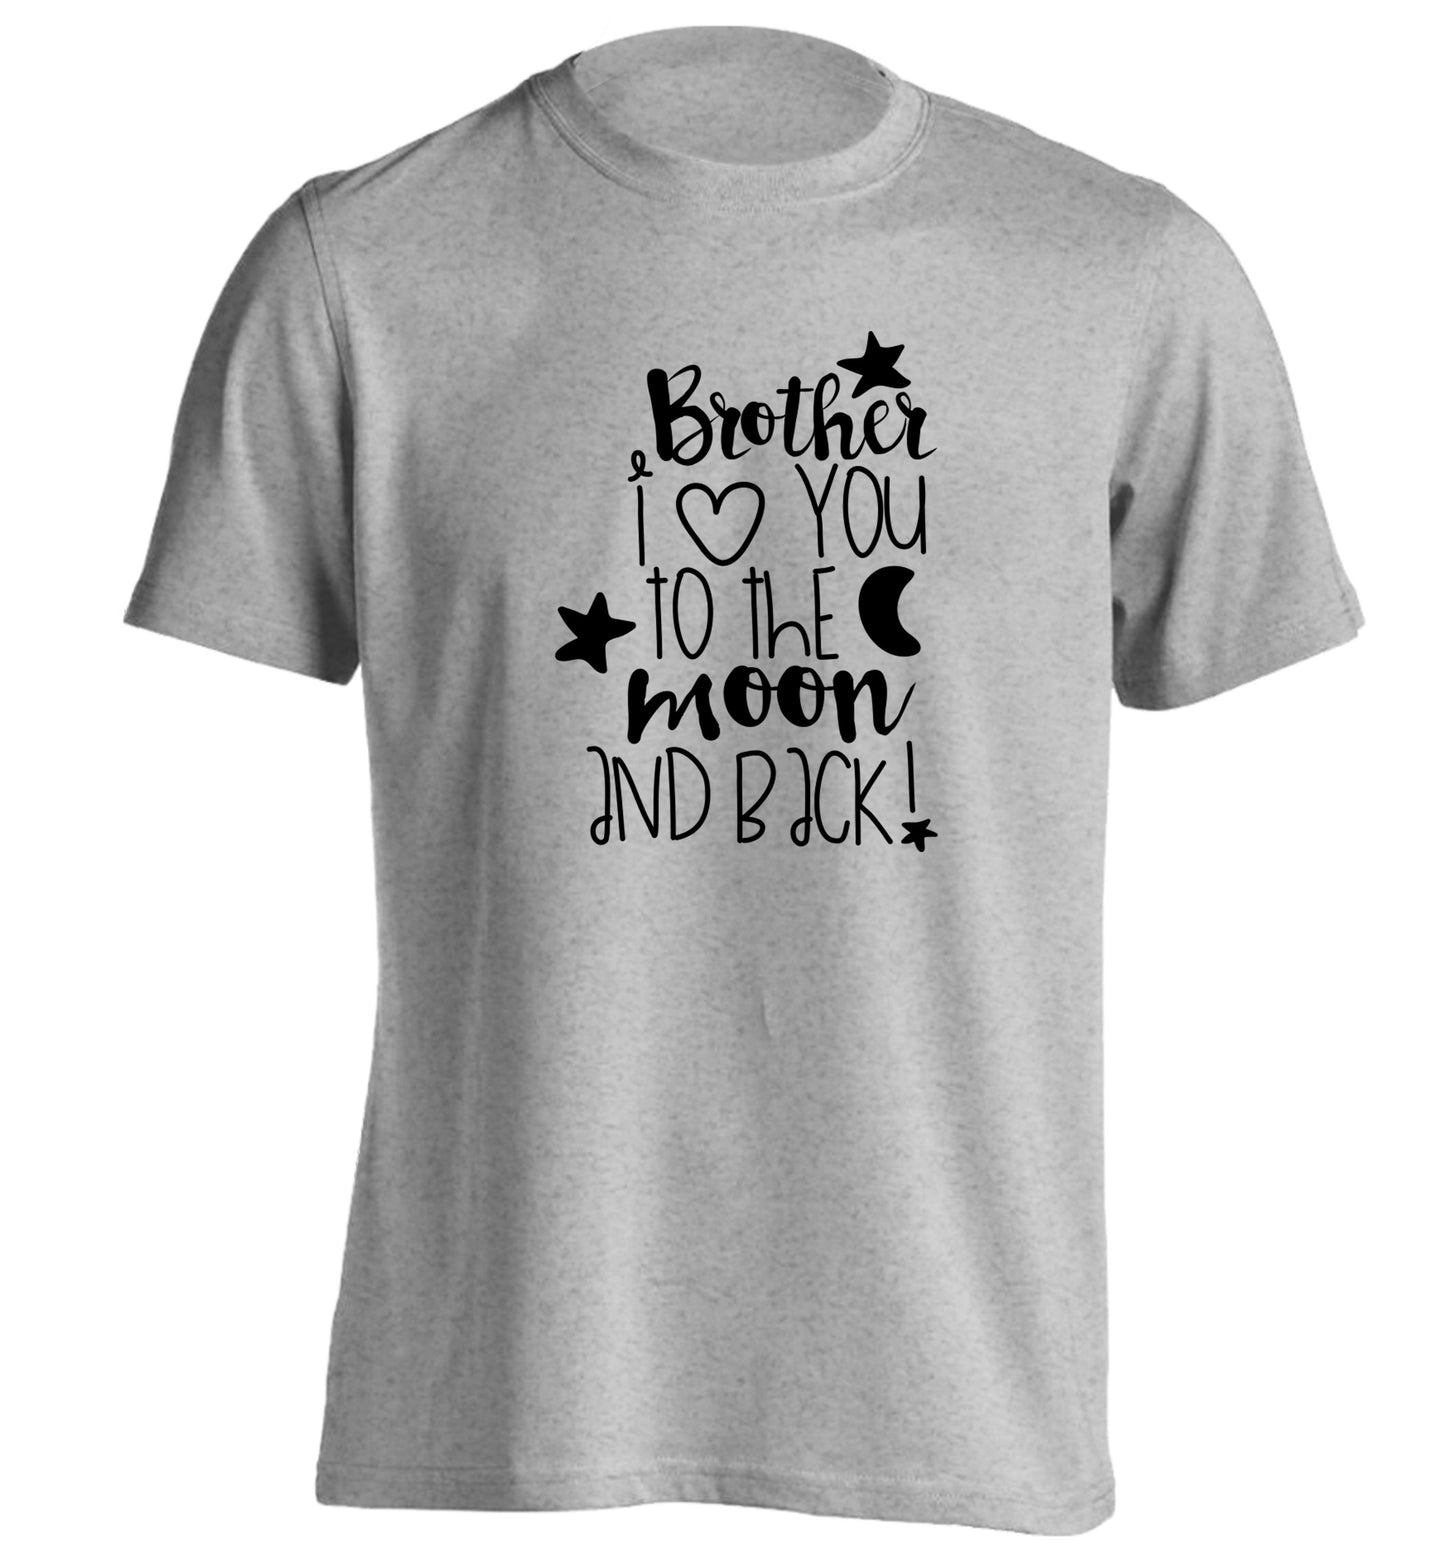 Brother I love you to the moon and back adults unisex grey Tshirt 2XL